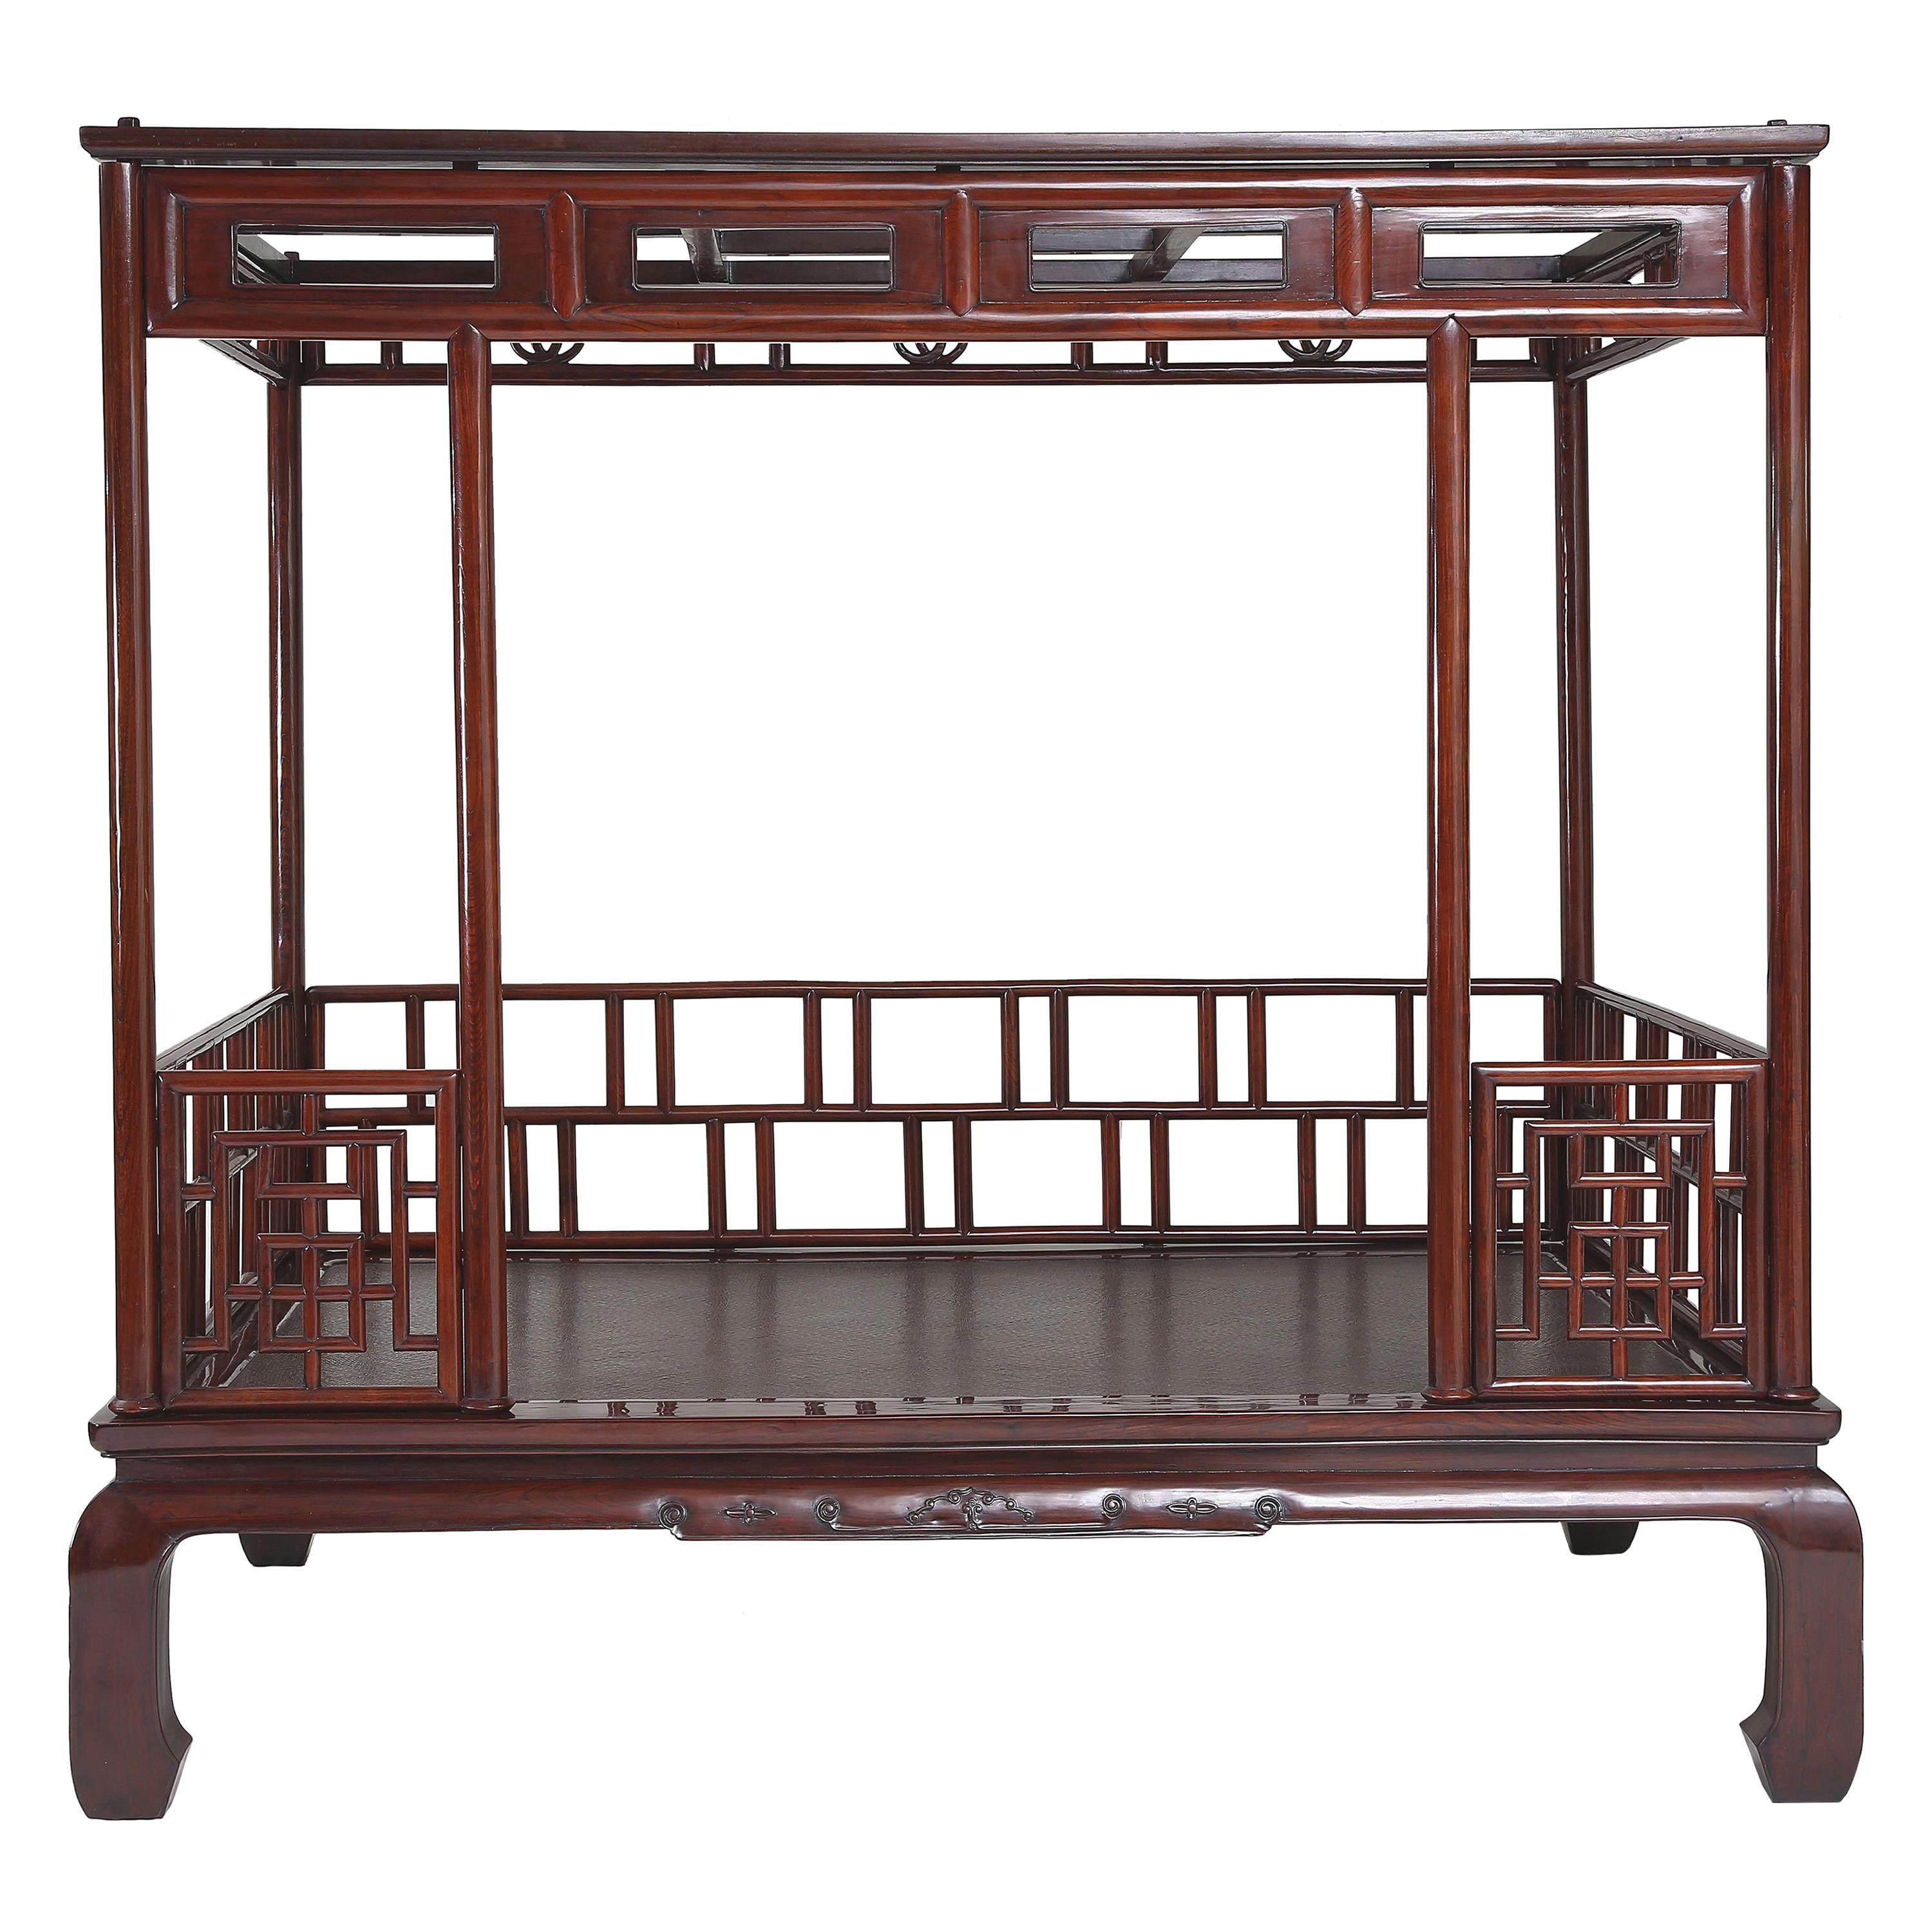 Antique Chinese Six Post Canopy Bed, circa 1800, Chinoiserie, Zhejiang